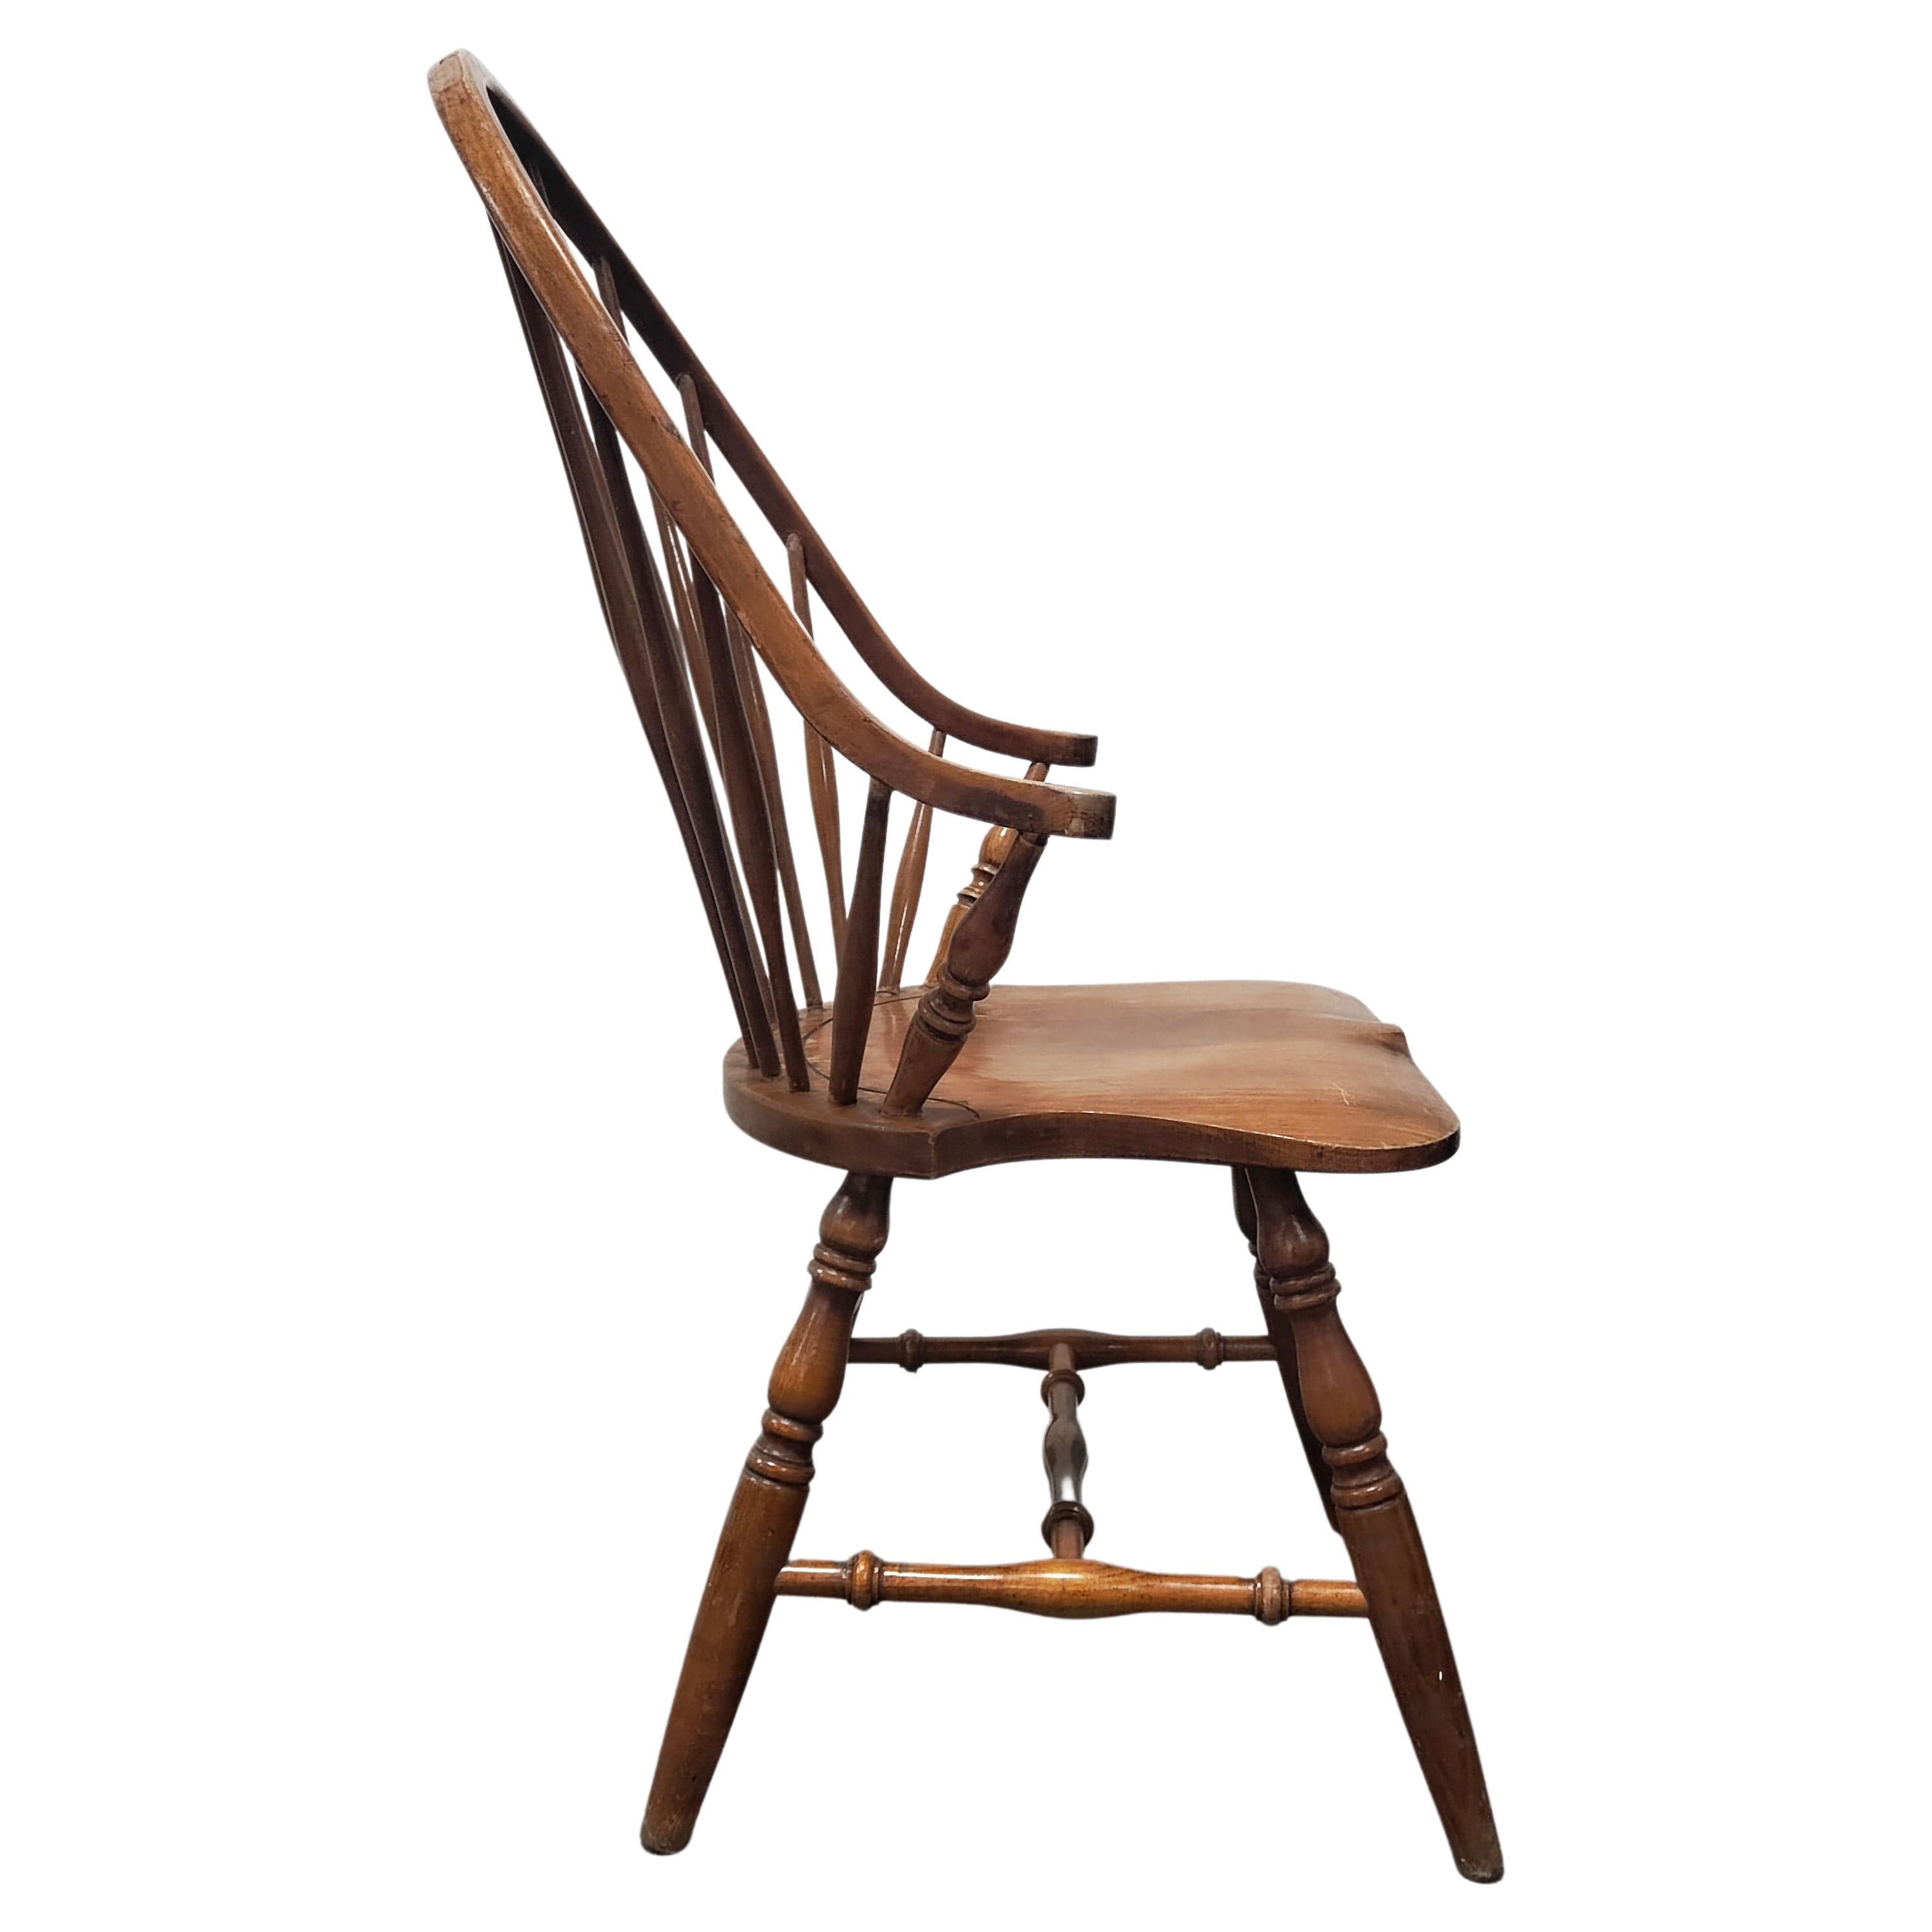 Rare Yugoslavian Windsor Tall Spindle Back Armchair in Beech, Slovenia 1950s For Sale